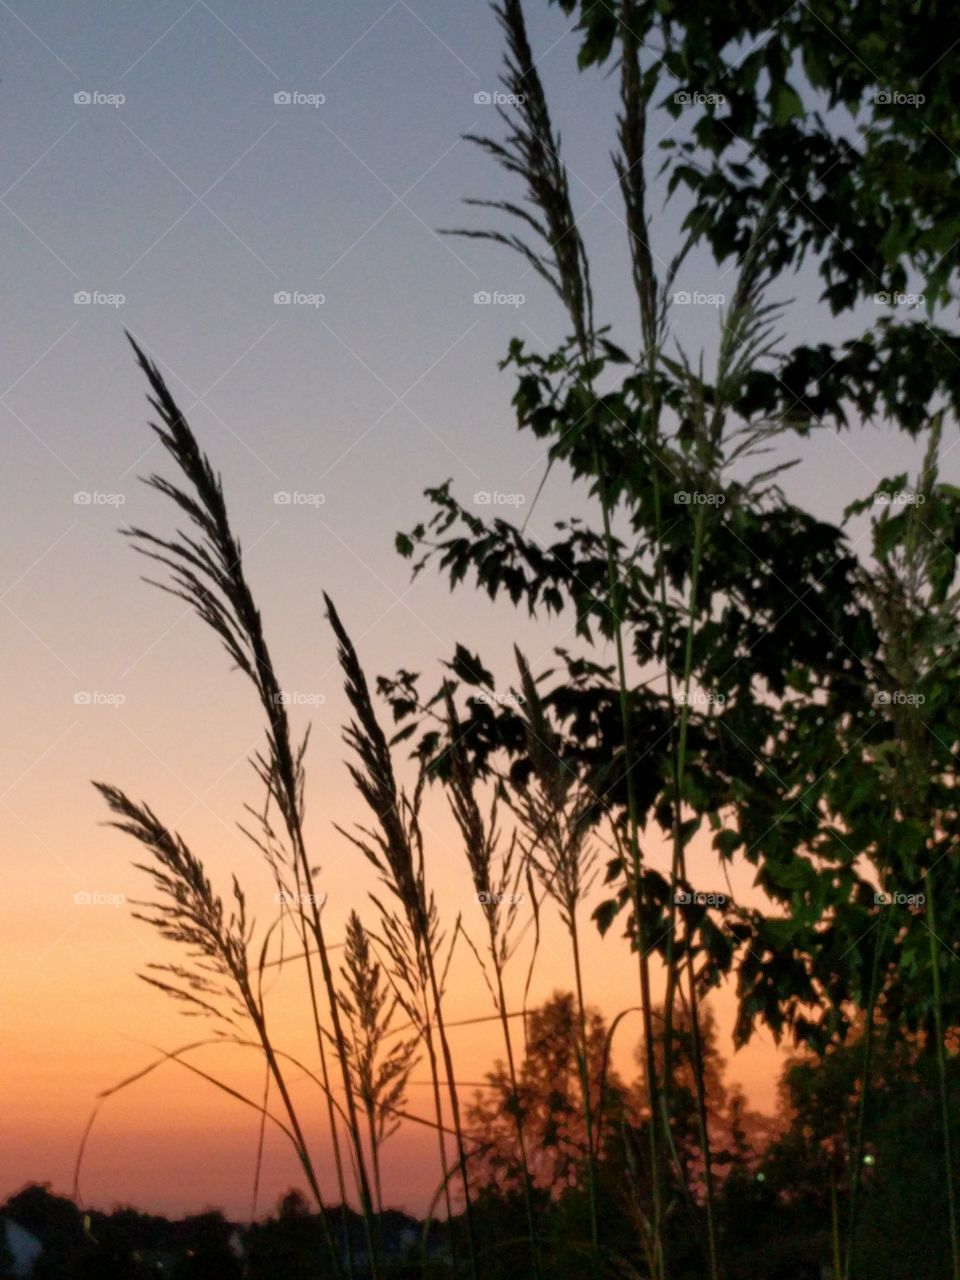 grasses waving against a sunset background